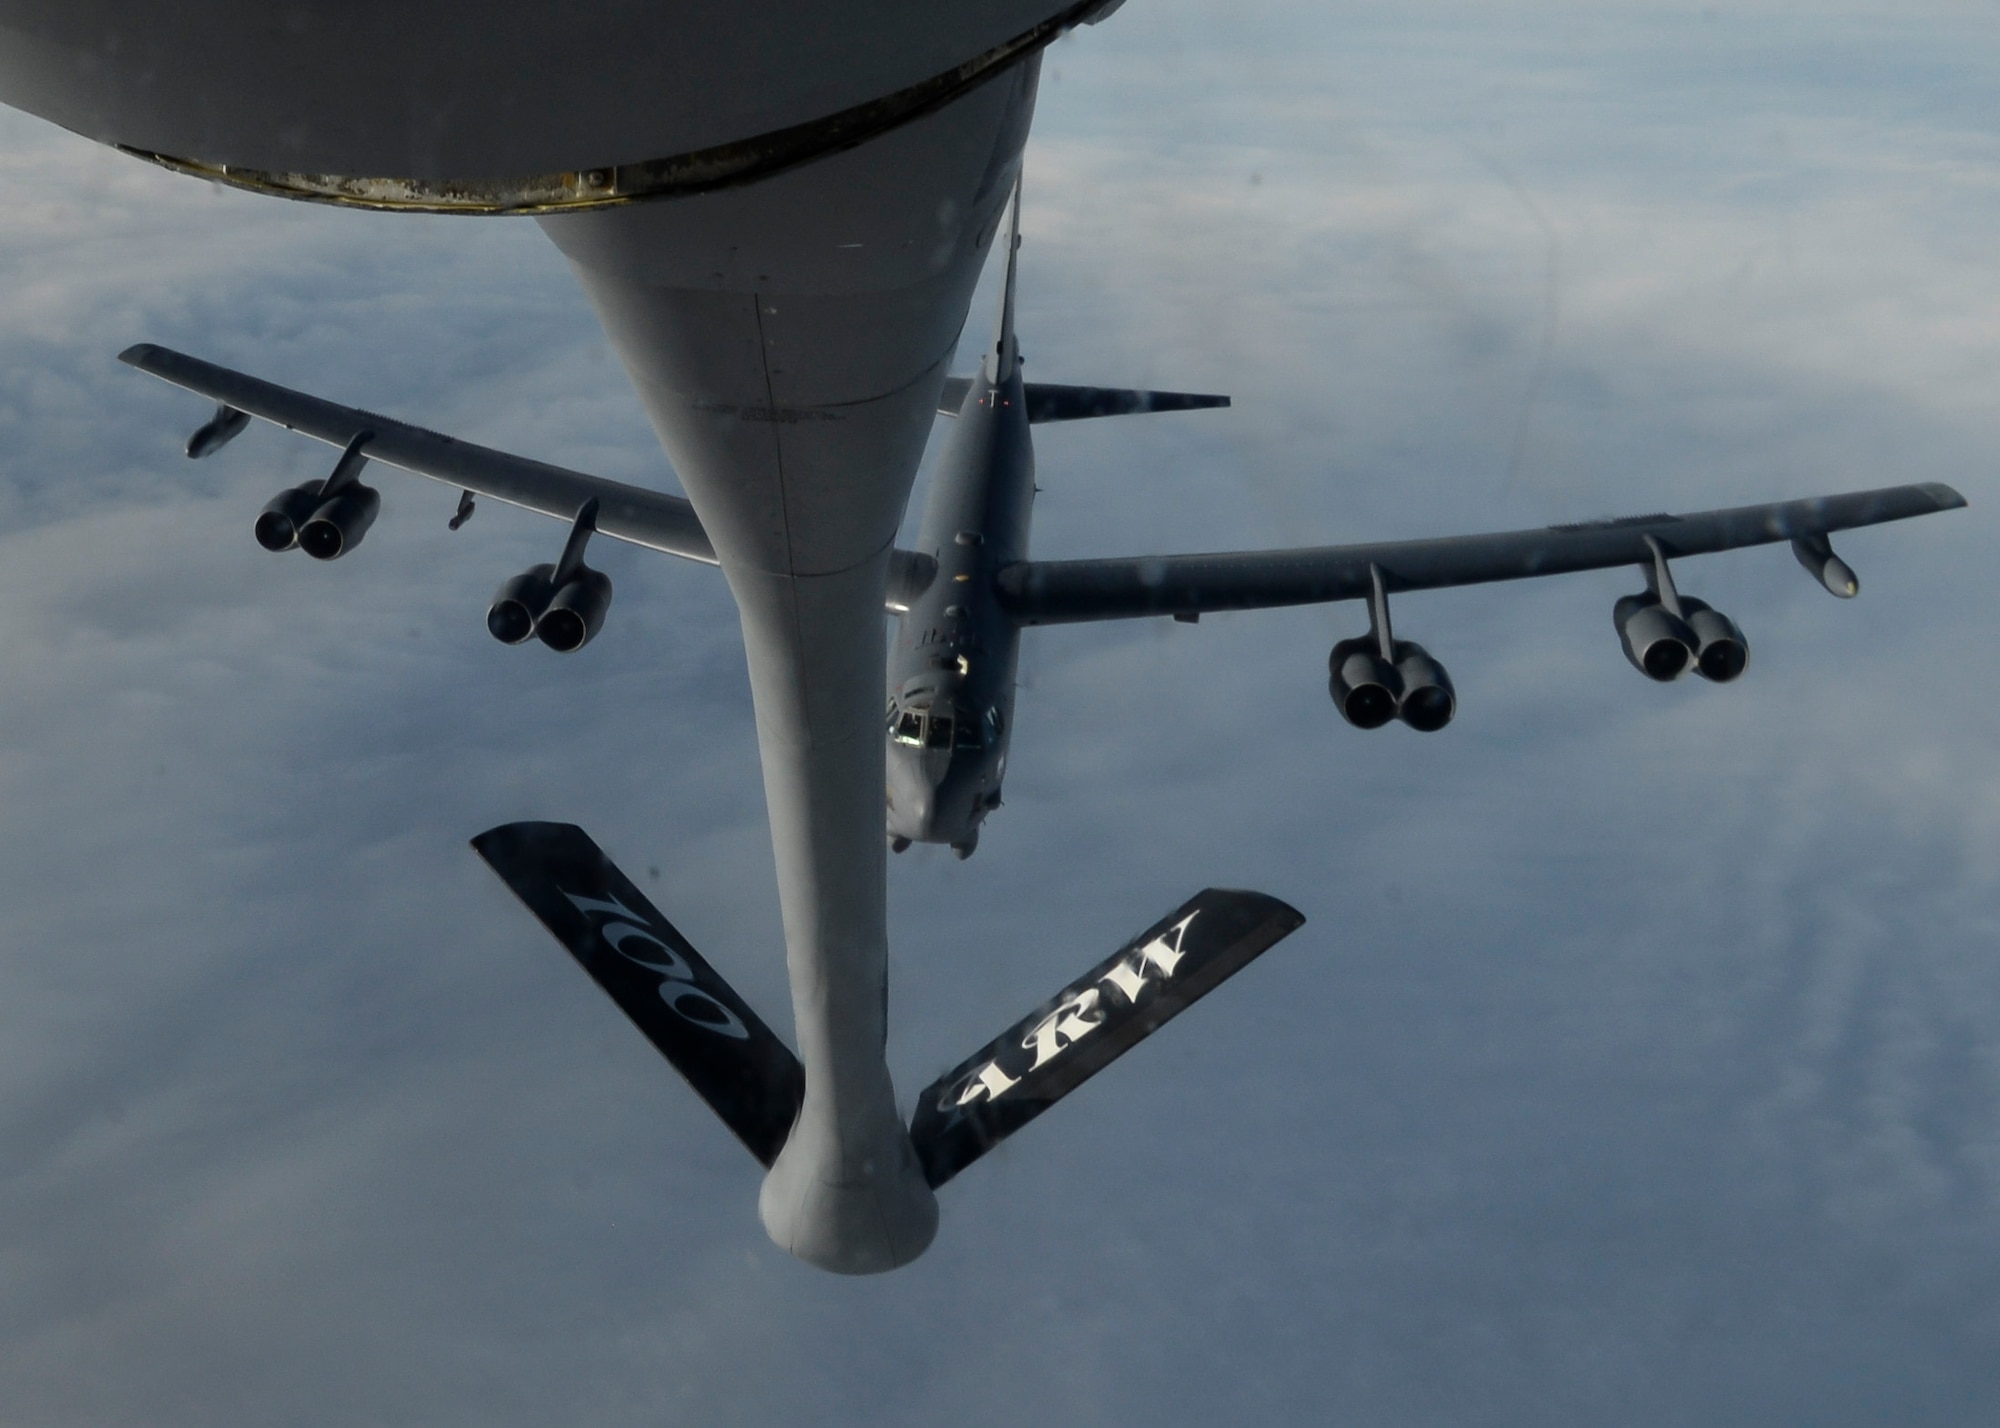 A U.S. Air Force B-52 Stratofortress assigned to Barksdale Air Force Base, La., approaches a KC-135 Stratotanker assigned to RAF Mildenhall, England, for refueling March 1, 2016, over the Trøndelag region of Norway. The exercise’s location will provide an extreme-cold environment in which a dozen allied and partner nations will jointly develop tactics, techniques and procedures. (U.S. Air Force photo by Senior Airman Victoria H. Taylor/Released)